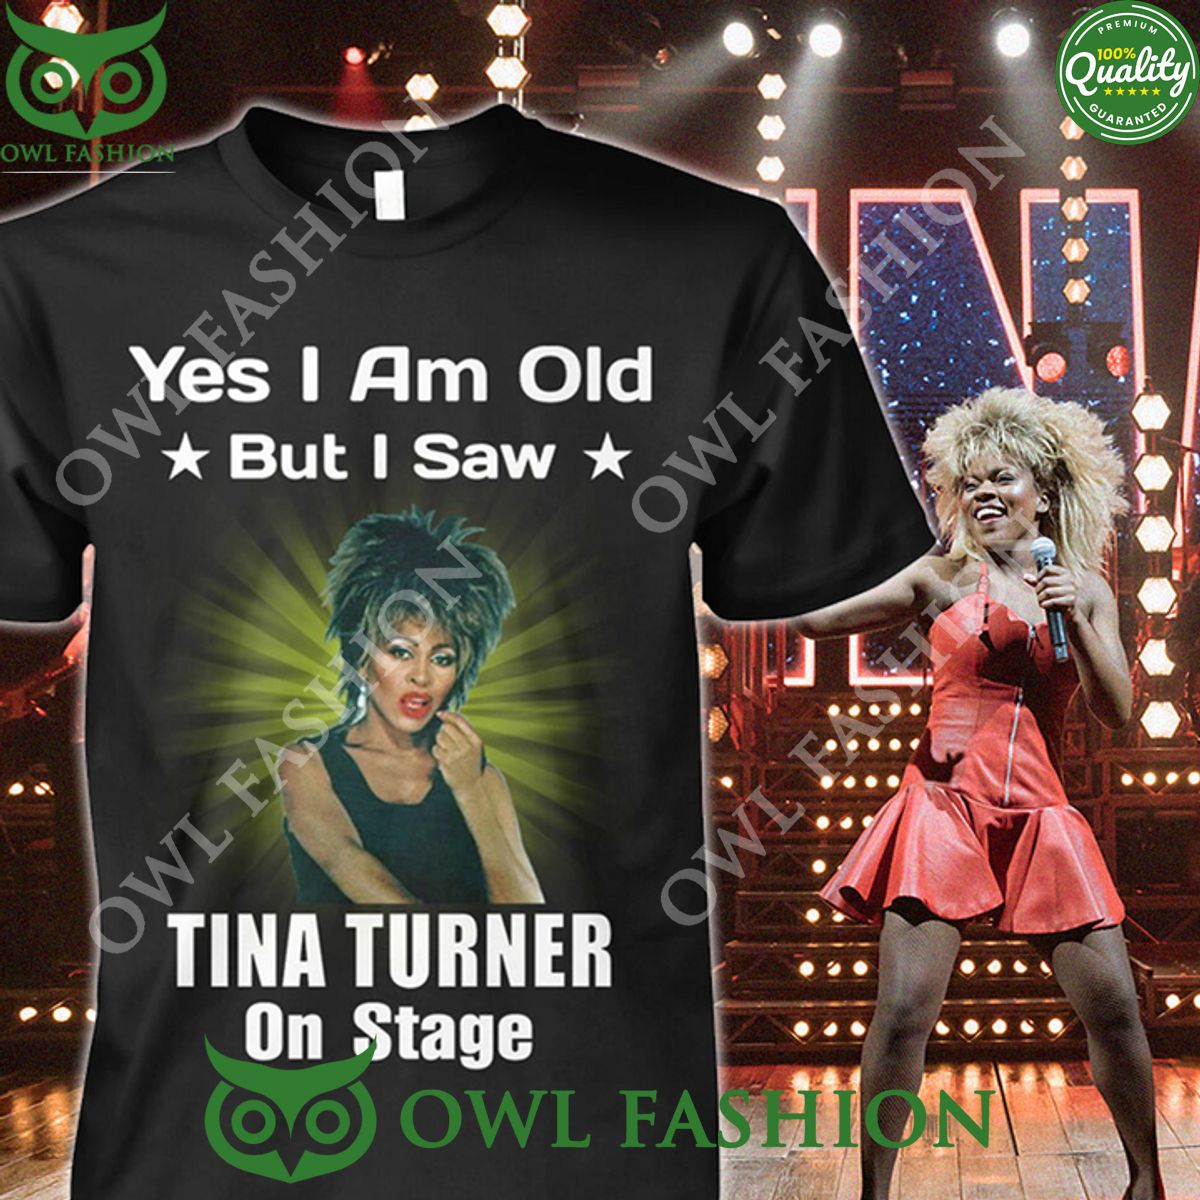 YES I AM OLD BUT I SAW TINA TURNER ON STAGE t SHIRT